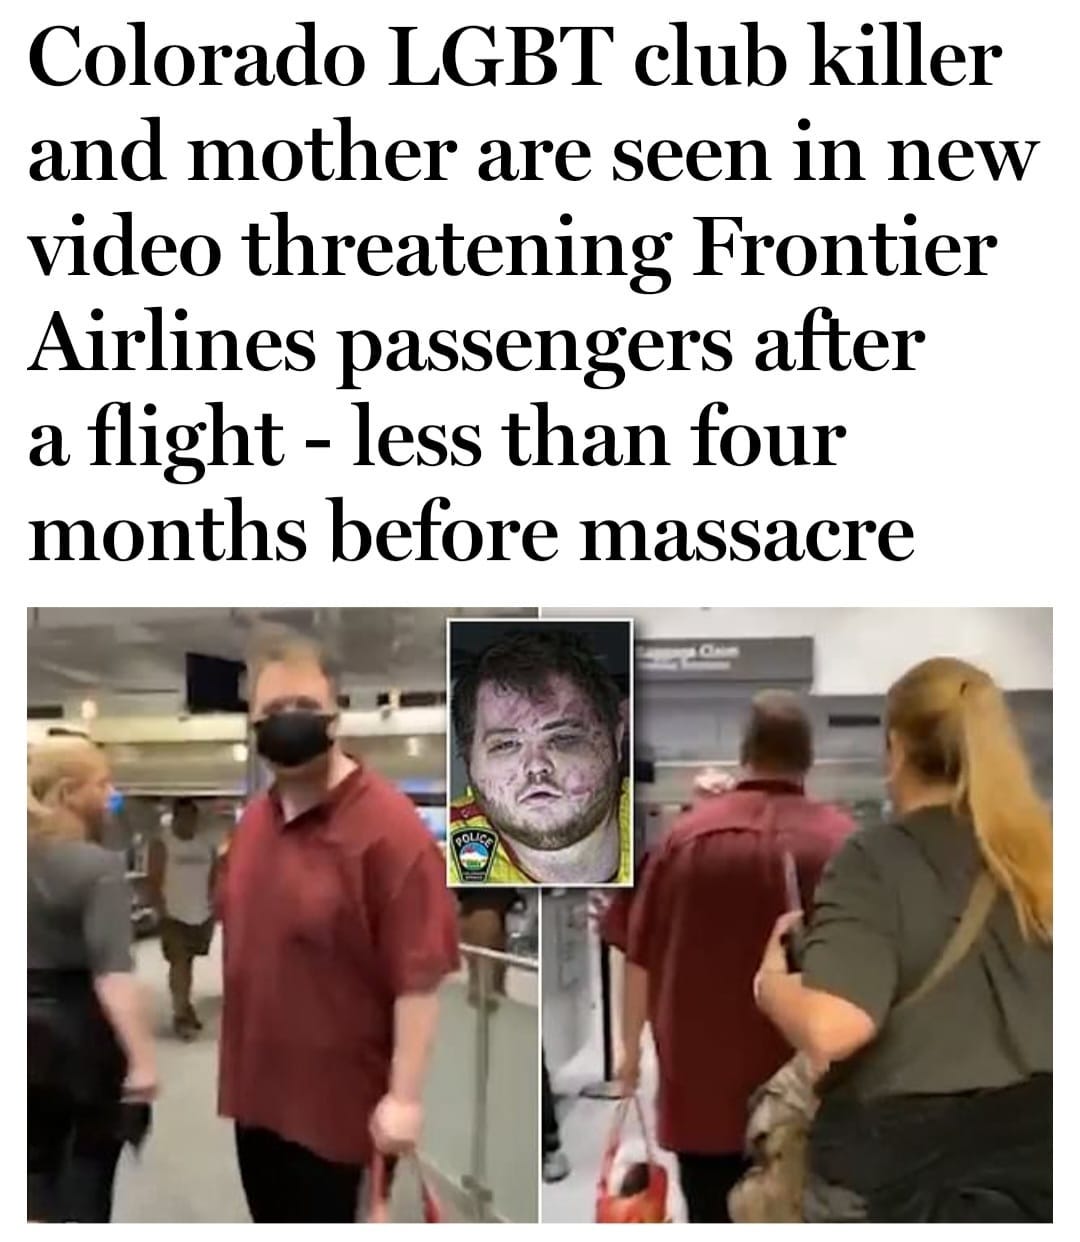 May be an image of 6 people and text that says 'Colorado LGBT club killer and mother are seen in new video threatening Frontier Airlines passengers after a flight less than four months before massacre'